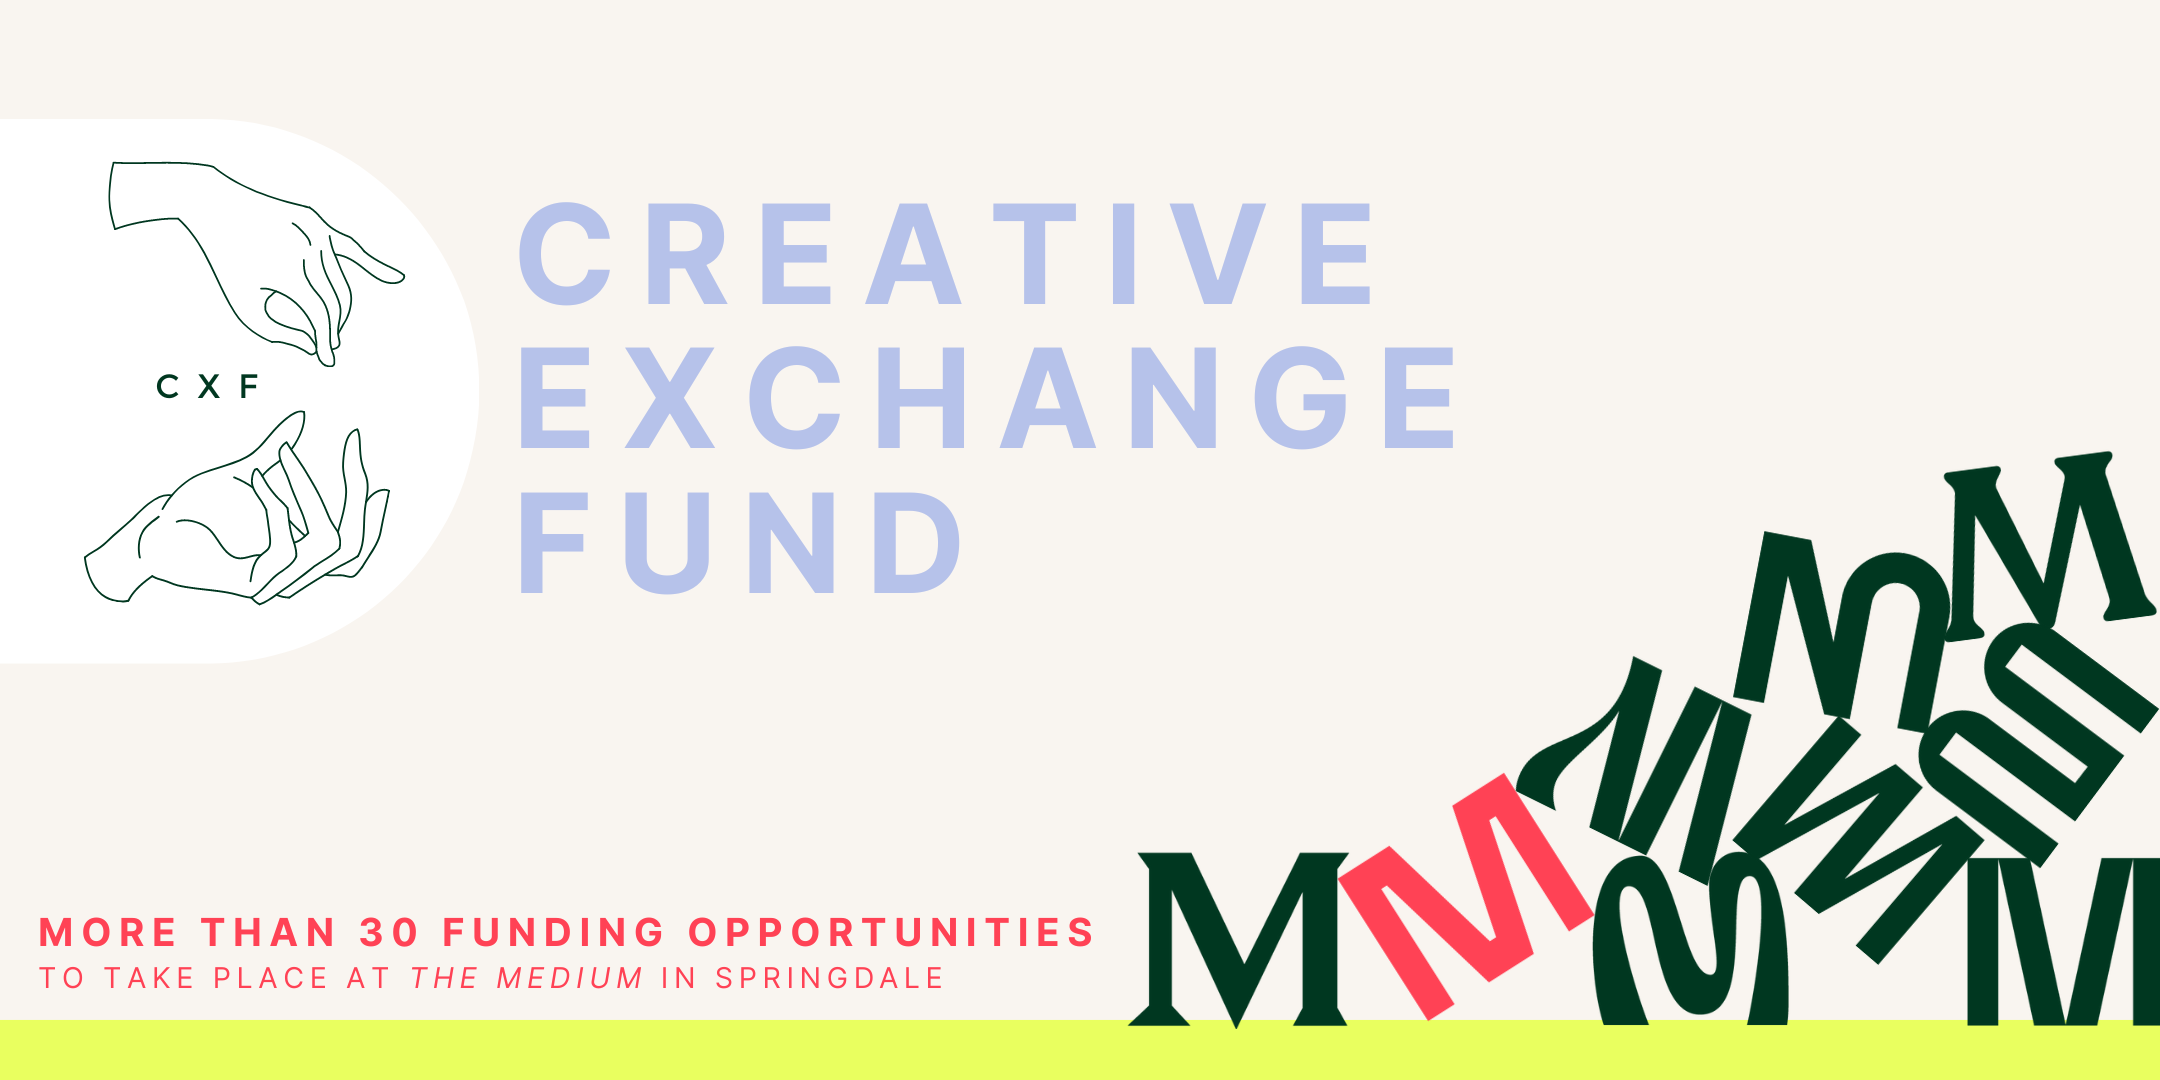 Second Year of Creative Exchange Fund to Launch in Springdale